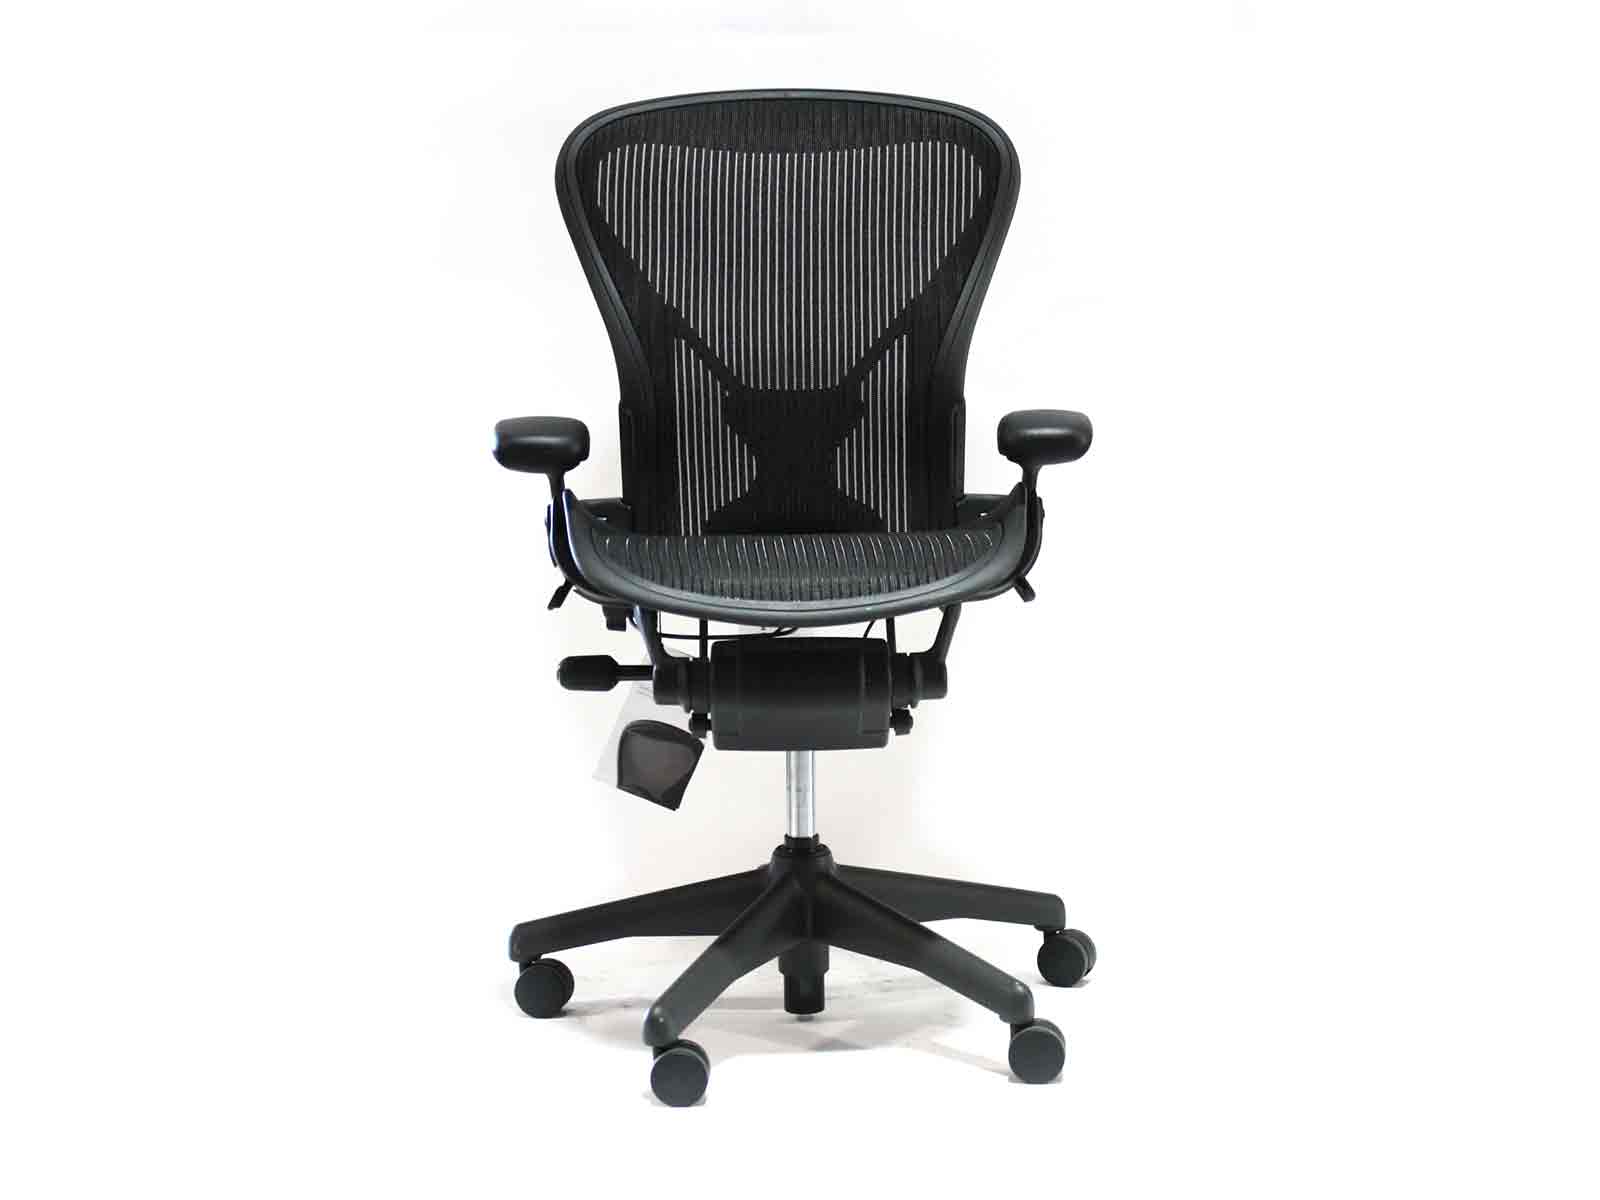 Find used Herman Miller Aeron black chairs at Office Furniture Outlet